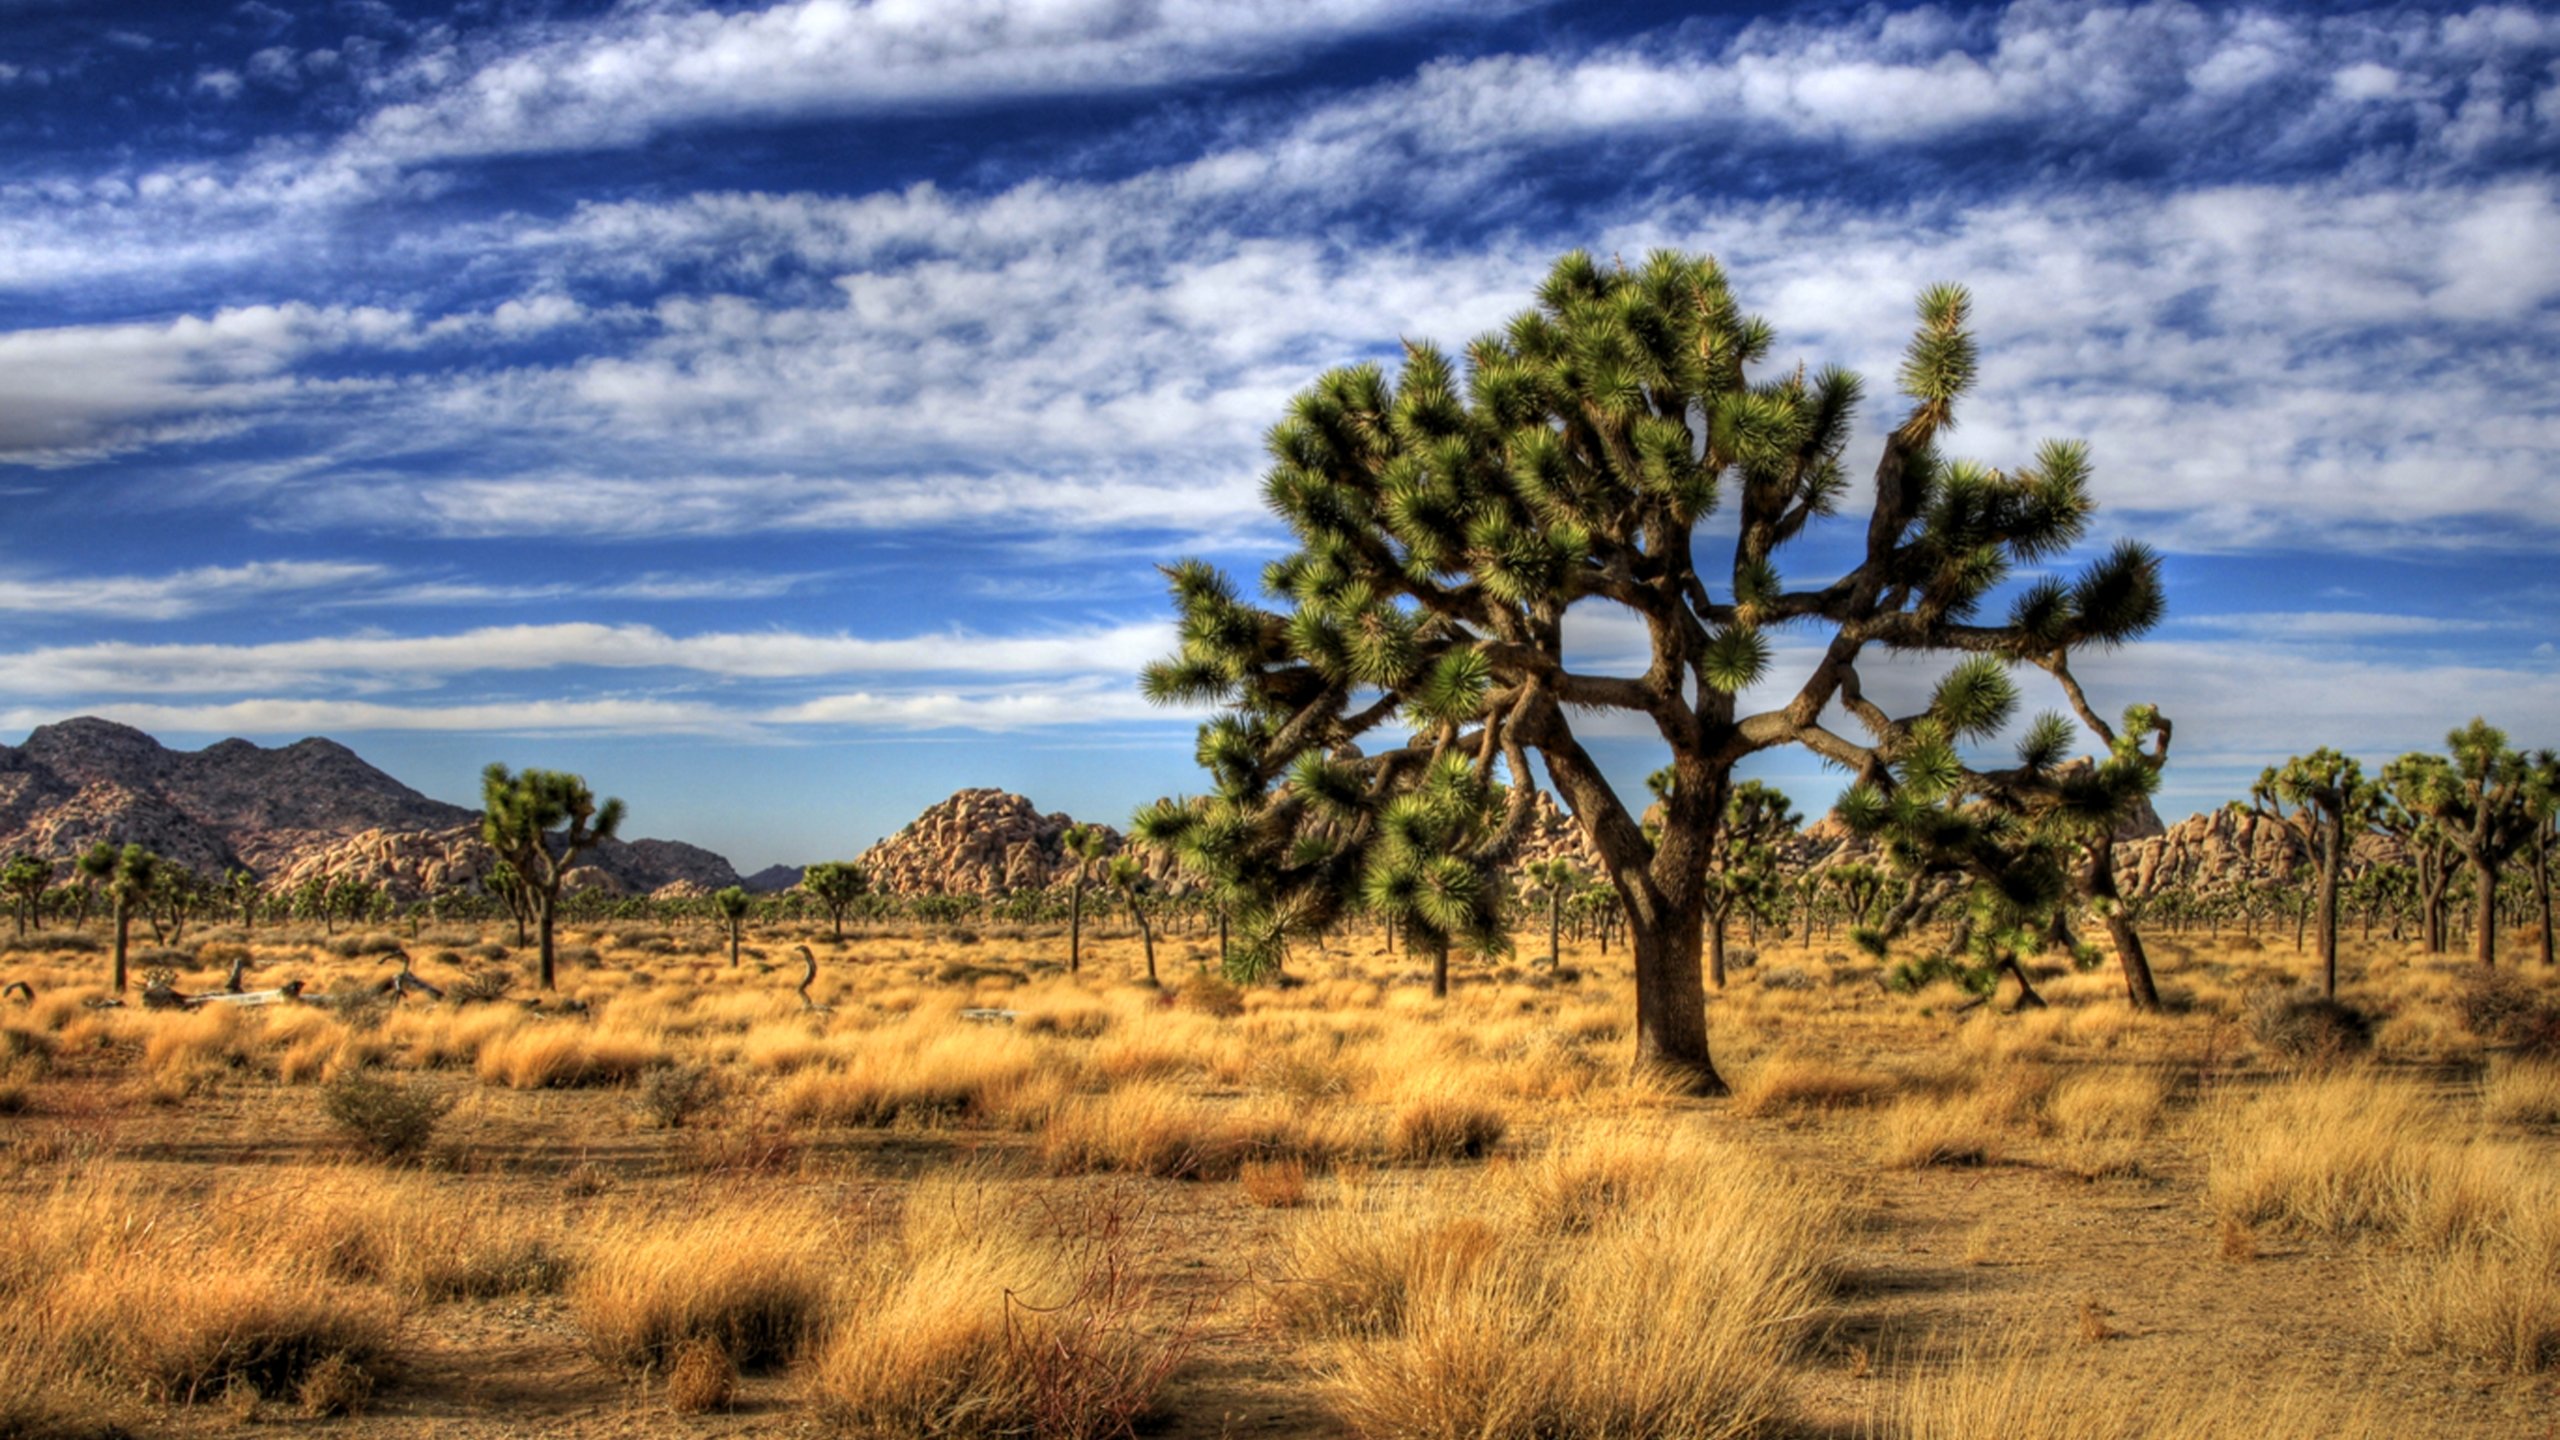 Download hd 2560x1440 Joshua Tree National Park desktop background ID:254710 for free